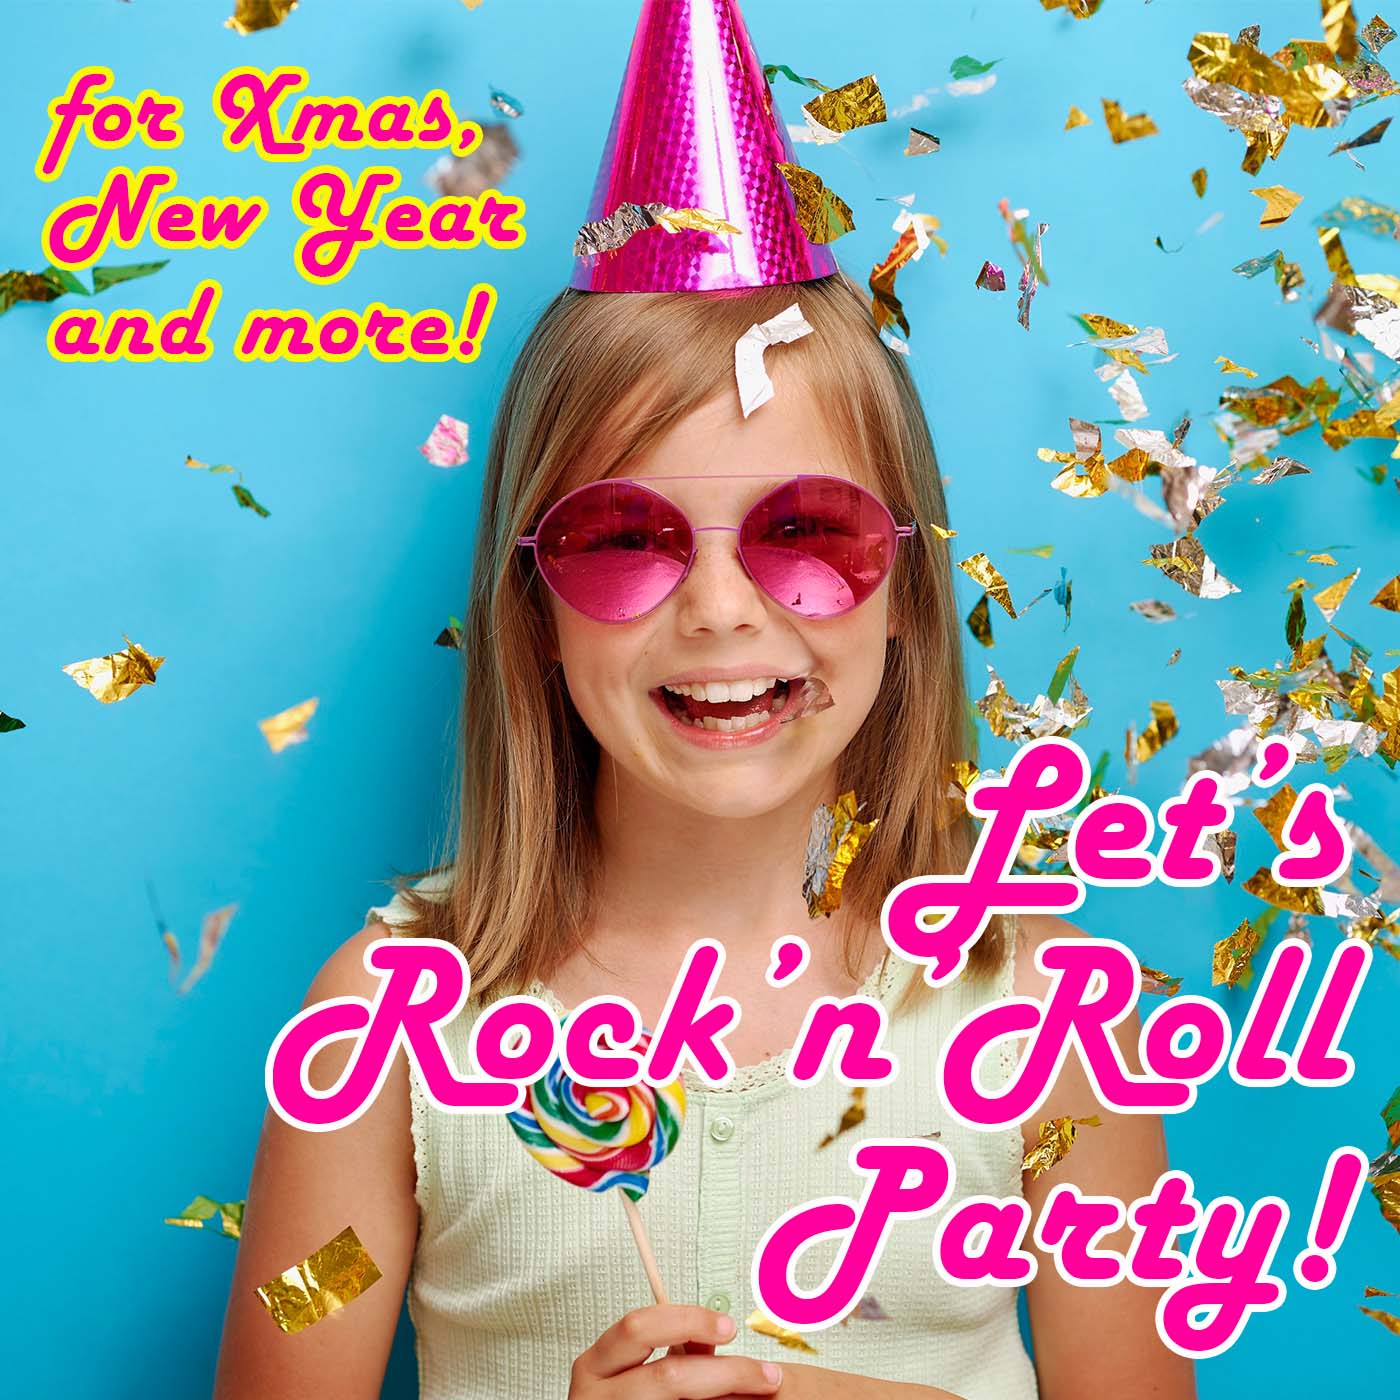 Let's Rock'n’ Roll Party!